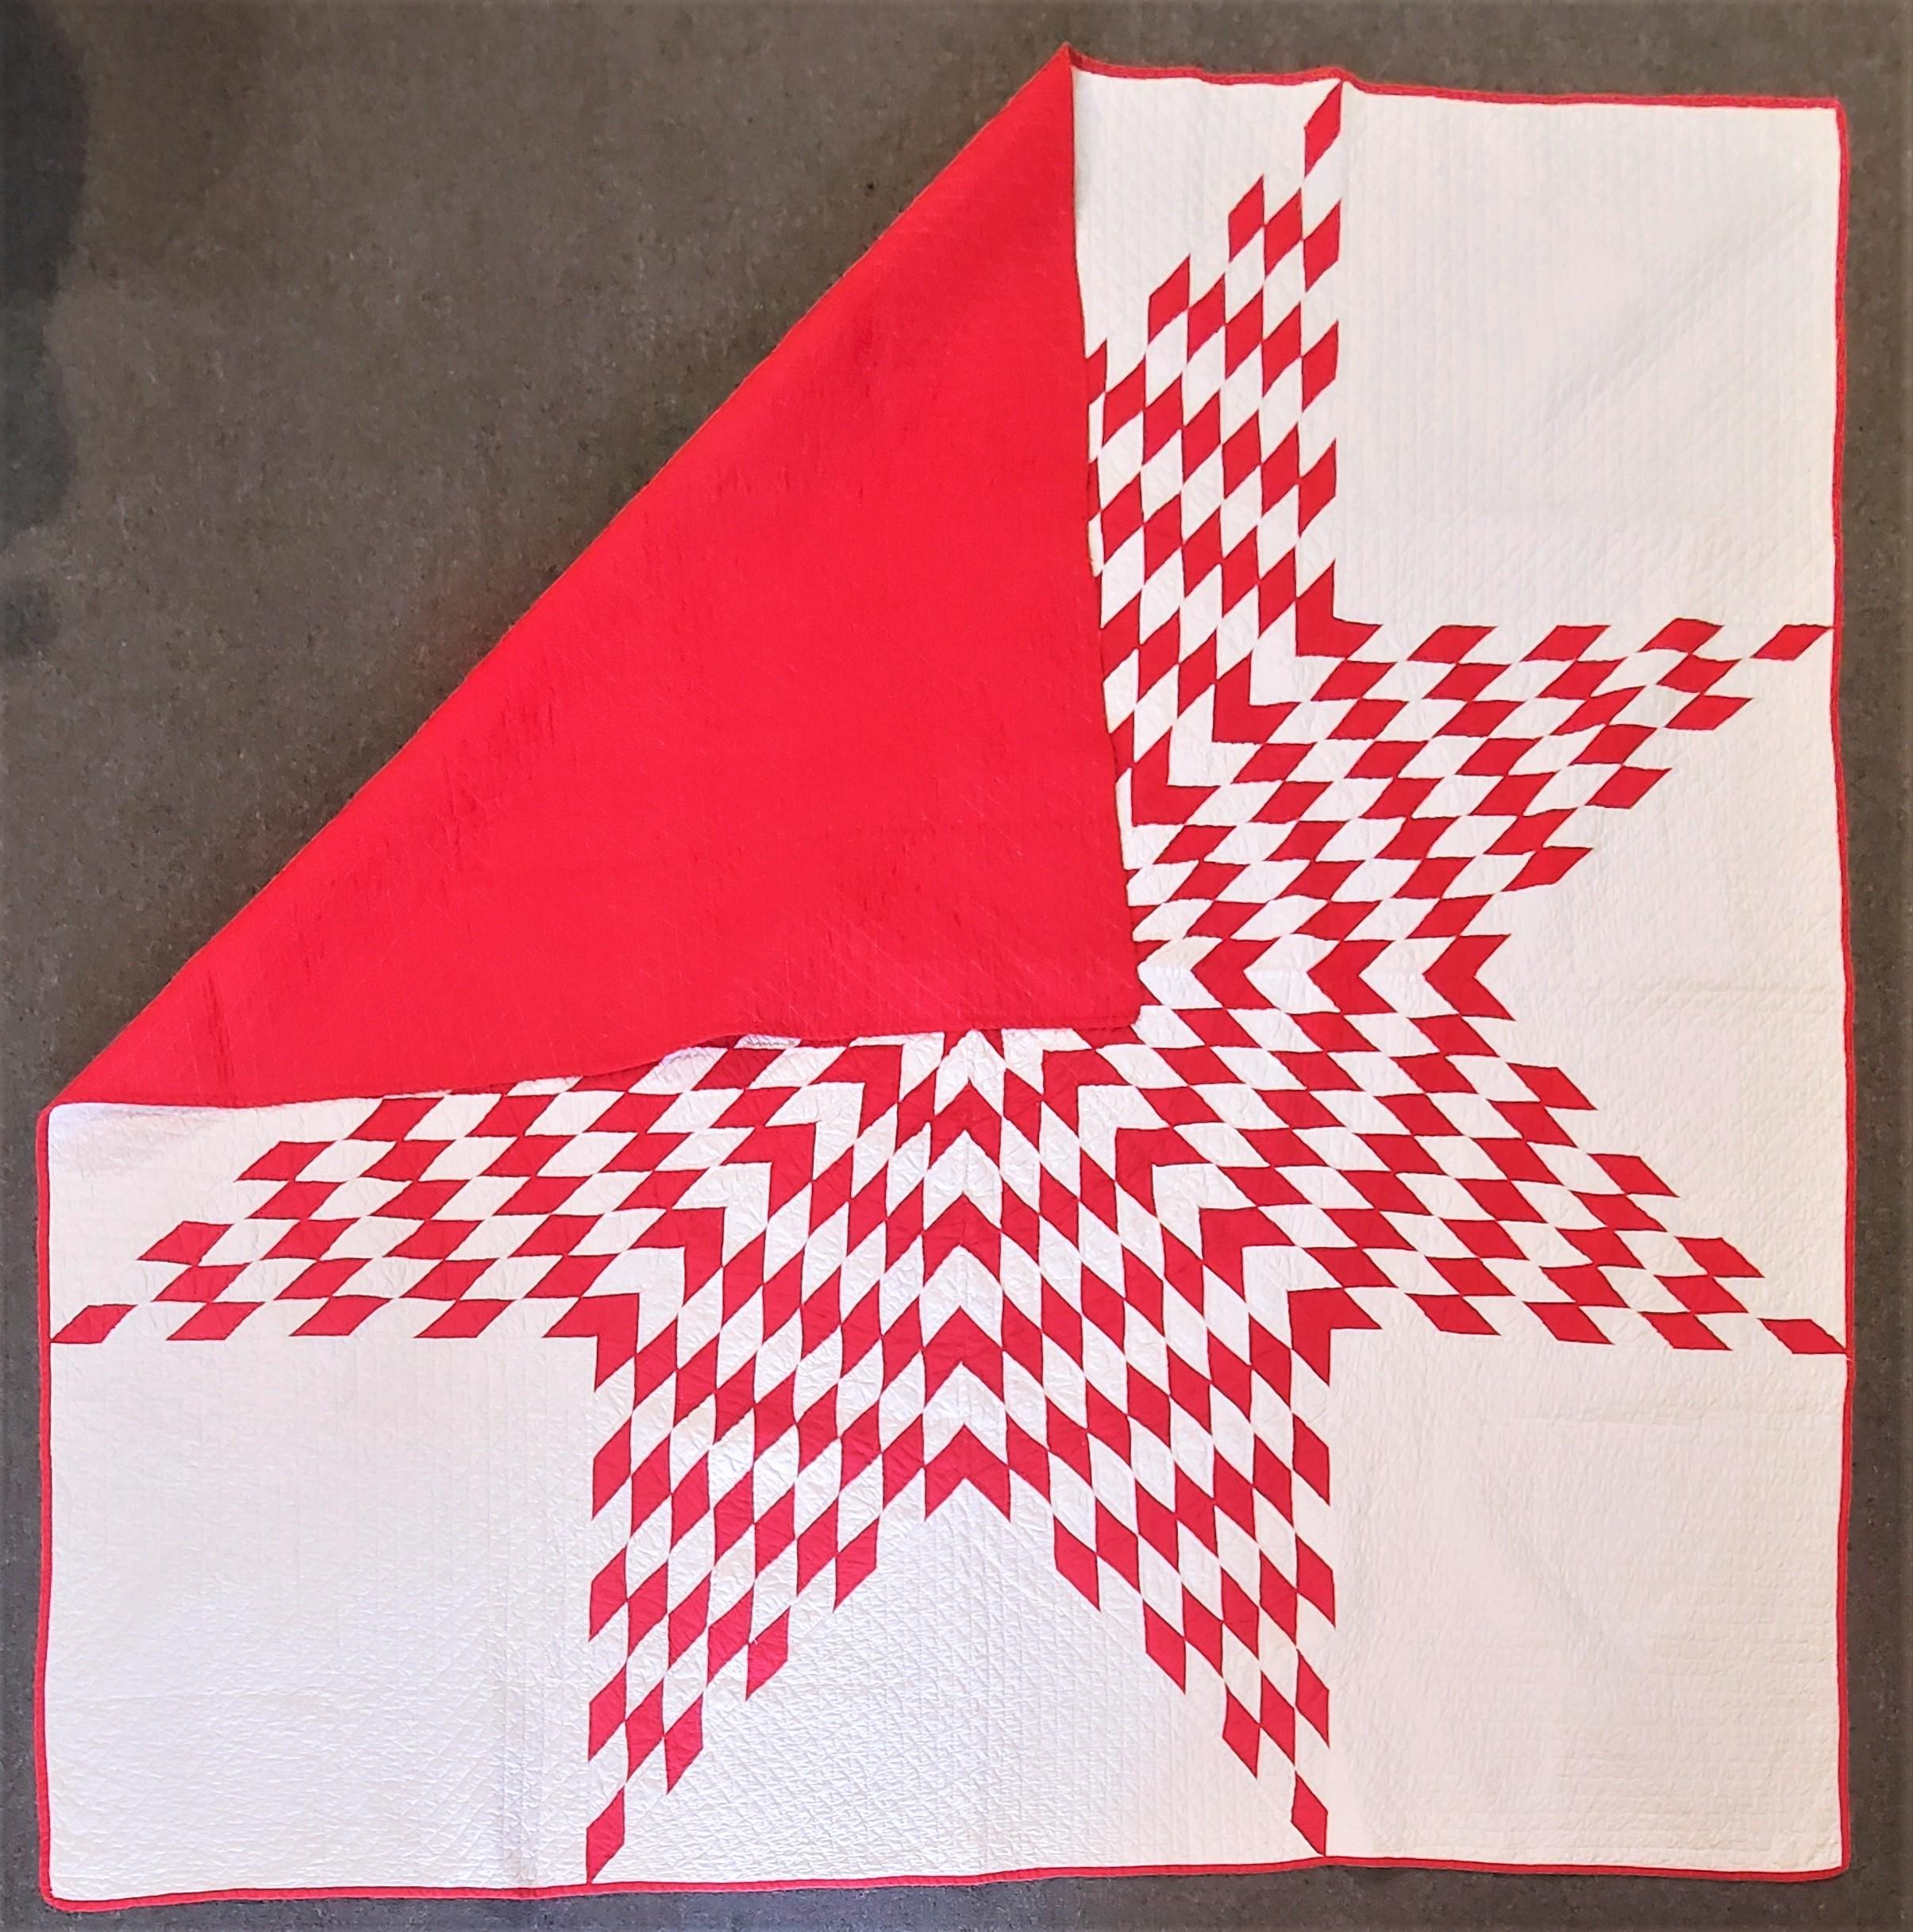 This fine pieced eight point star antique quilt is in amazing condition. The piecing and quilting are the very best.